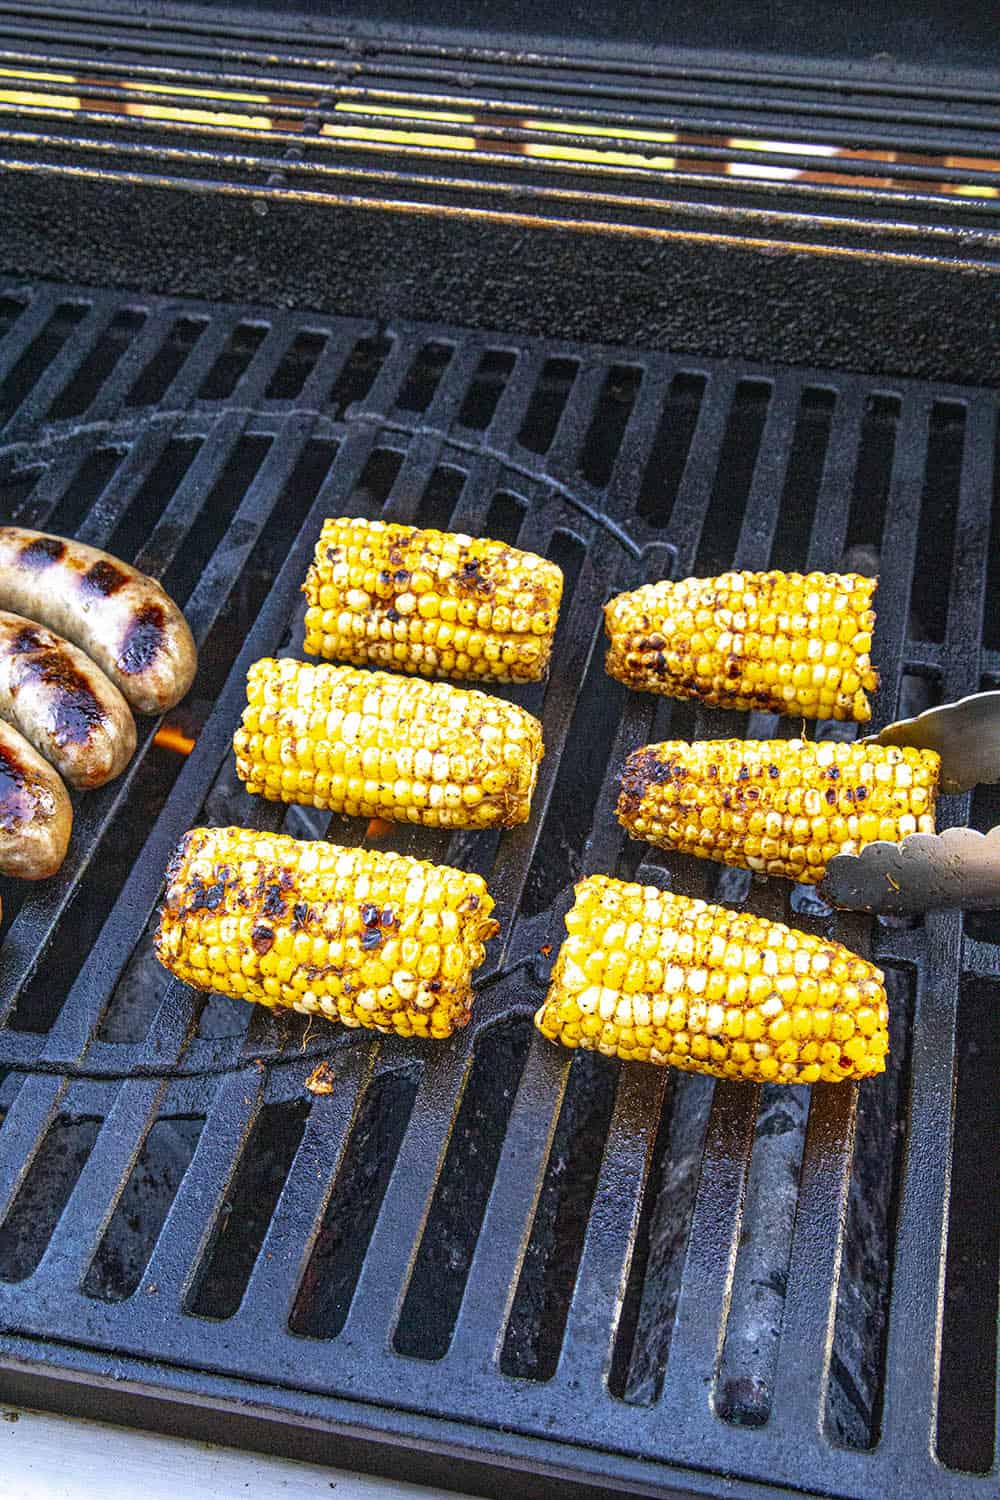 Jerk Rubbed Grilled Corn on the Cob on the grill